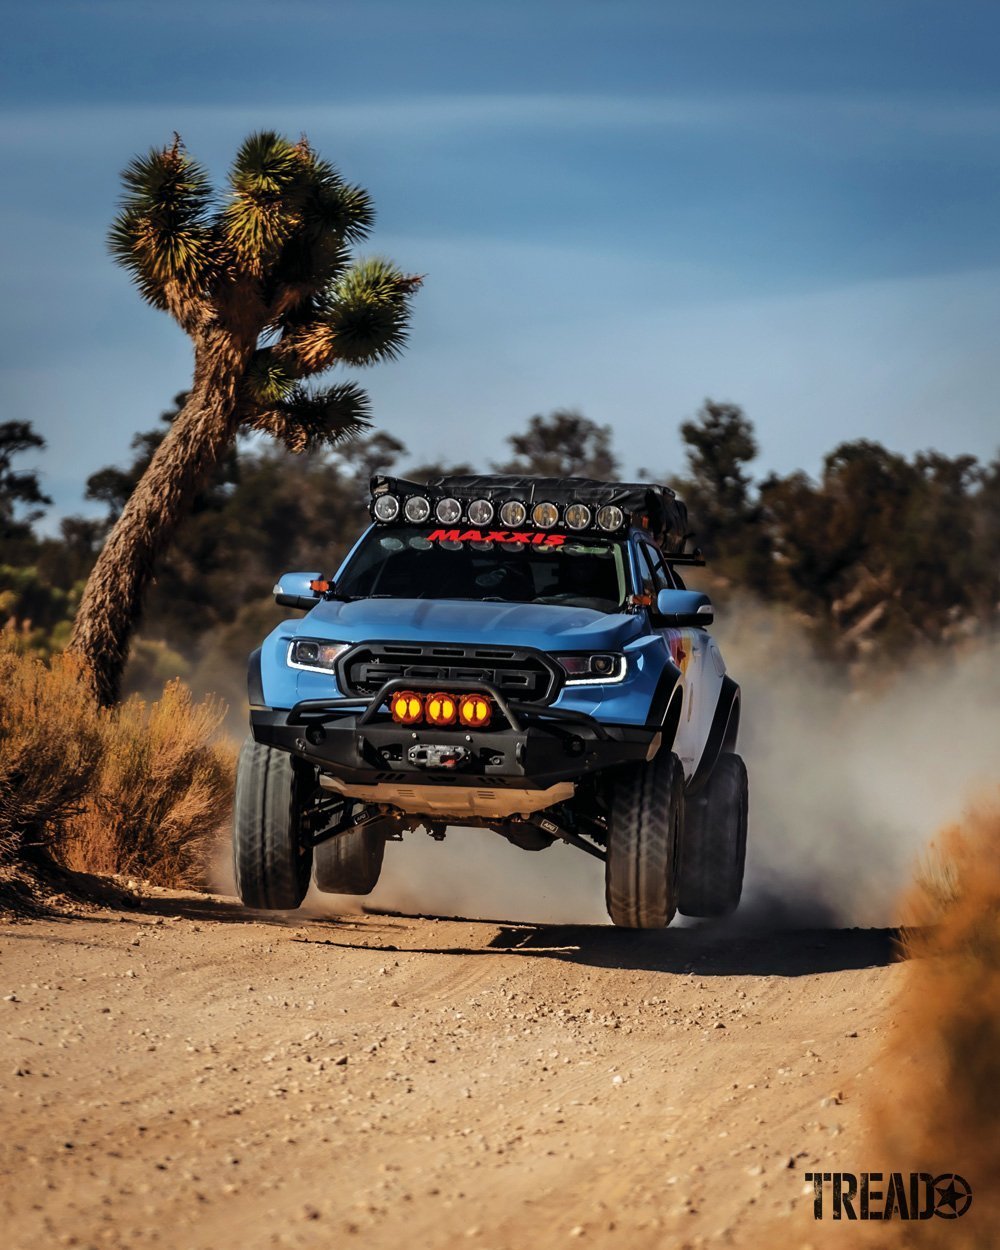 2019 Ford Ranger action shot as it drives down a desert dirt road, its light blue front end accented by yellow aux lights. 